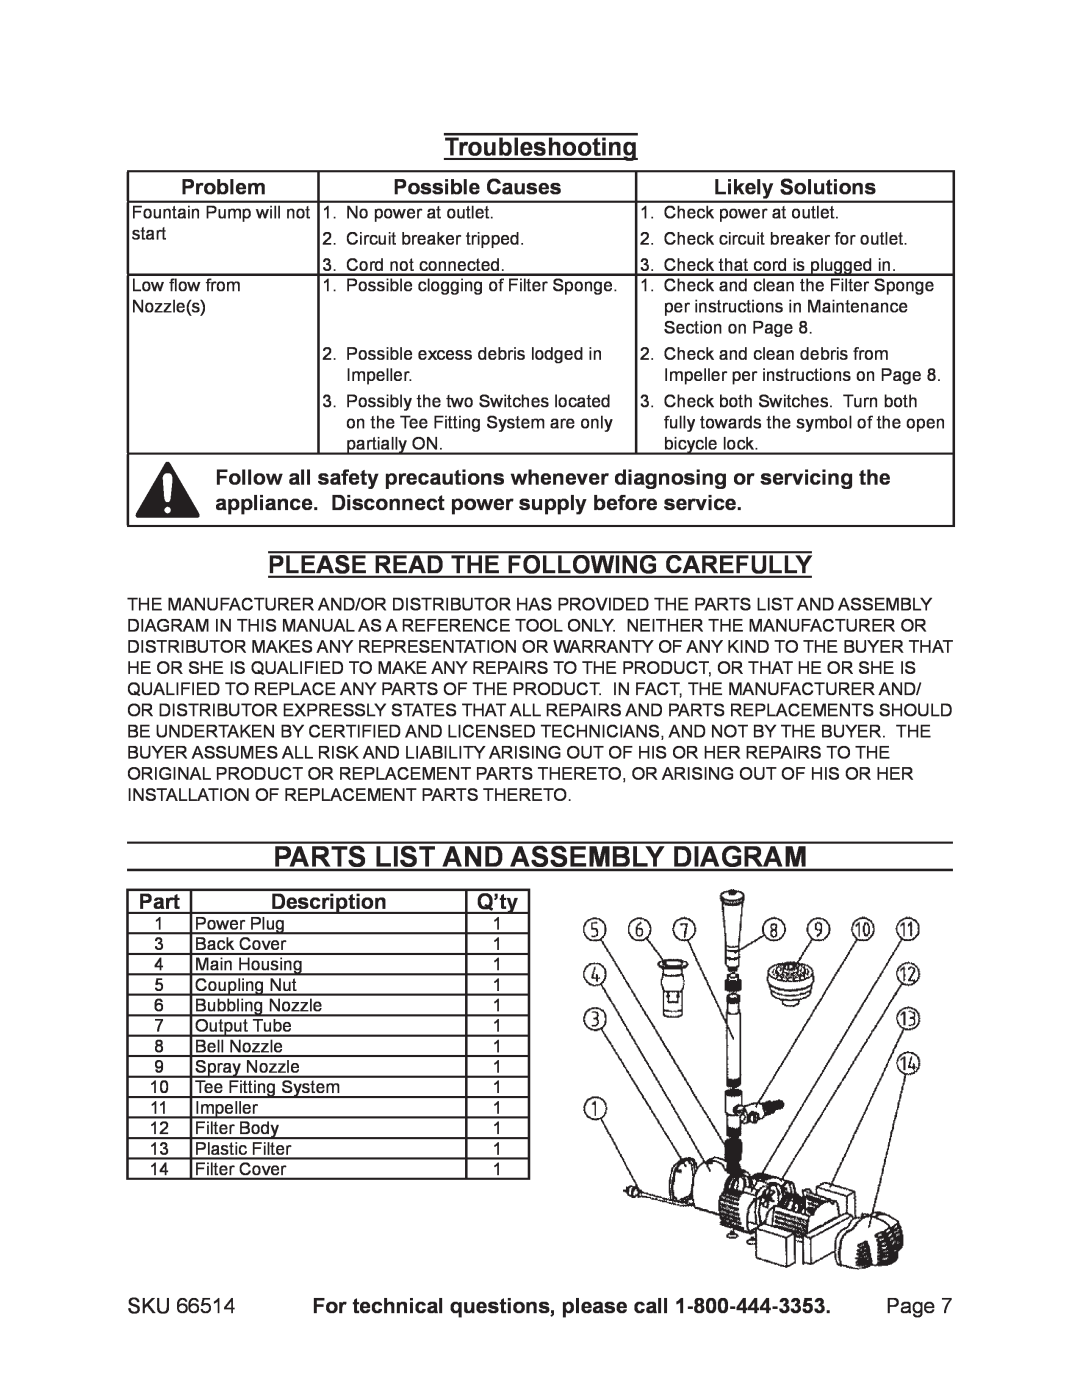 Harbor Freight Tools 66514 PARTS LIST and Assembly Diagram, Troubleshooting, Please Read The Following Carefully, Problem 